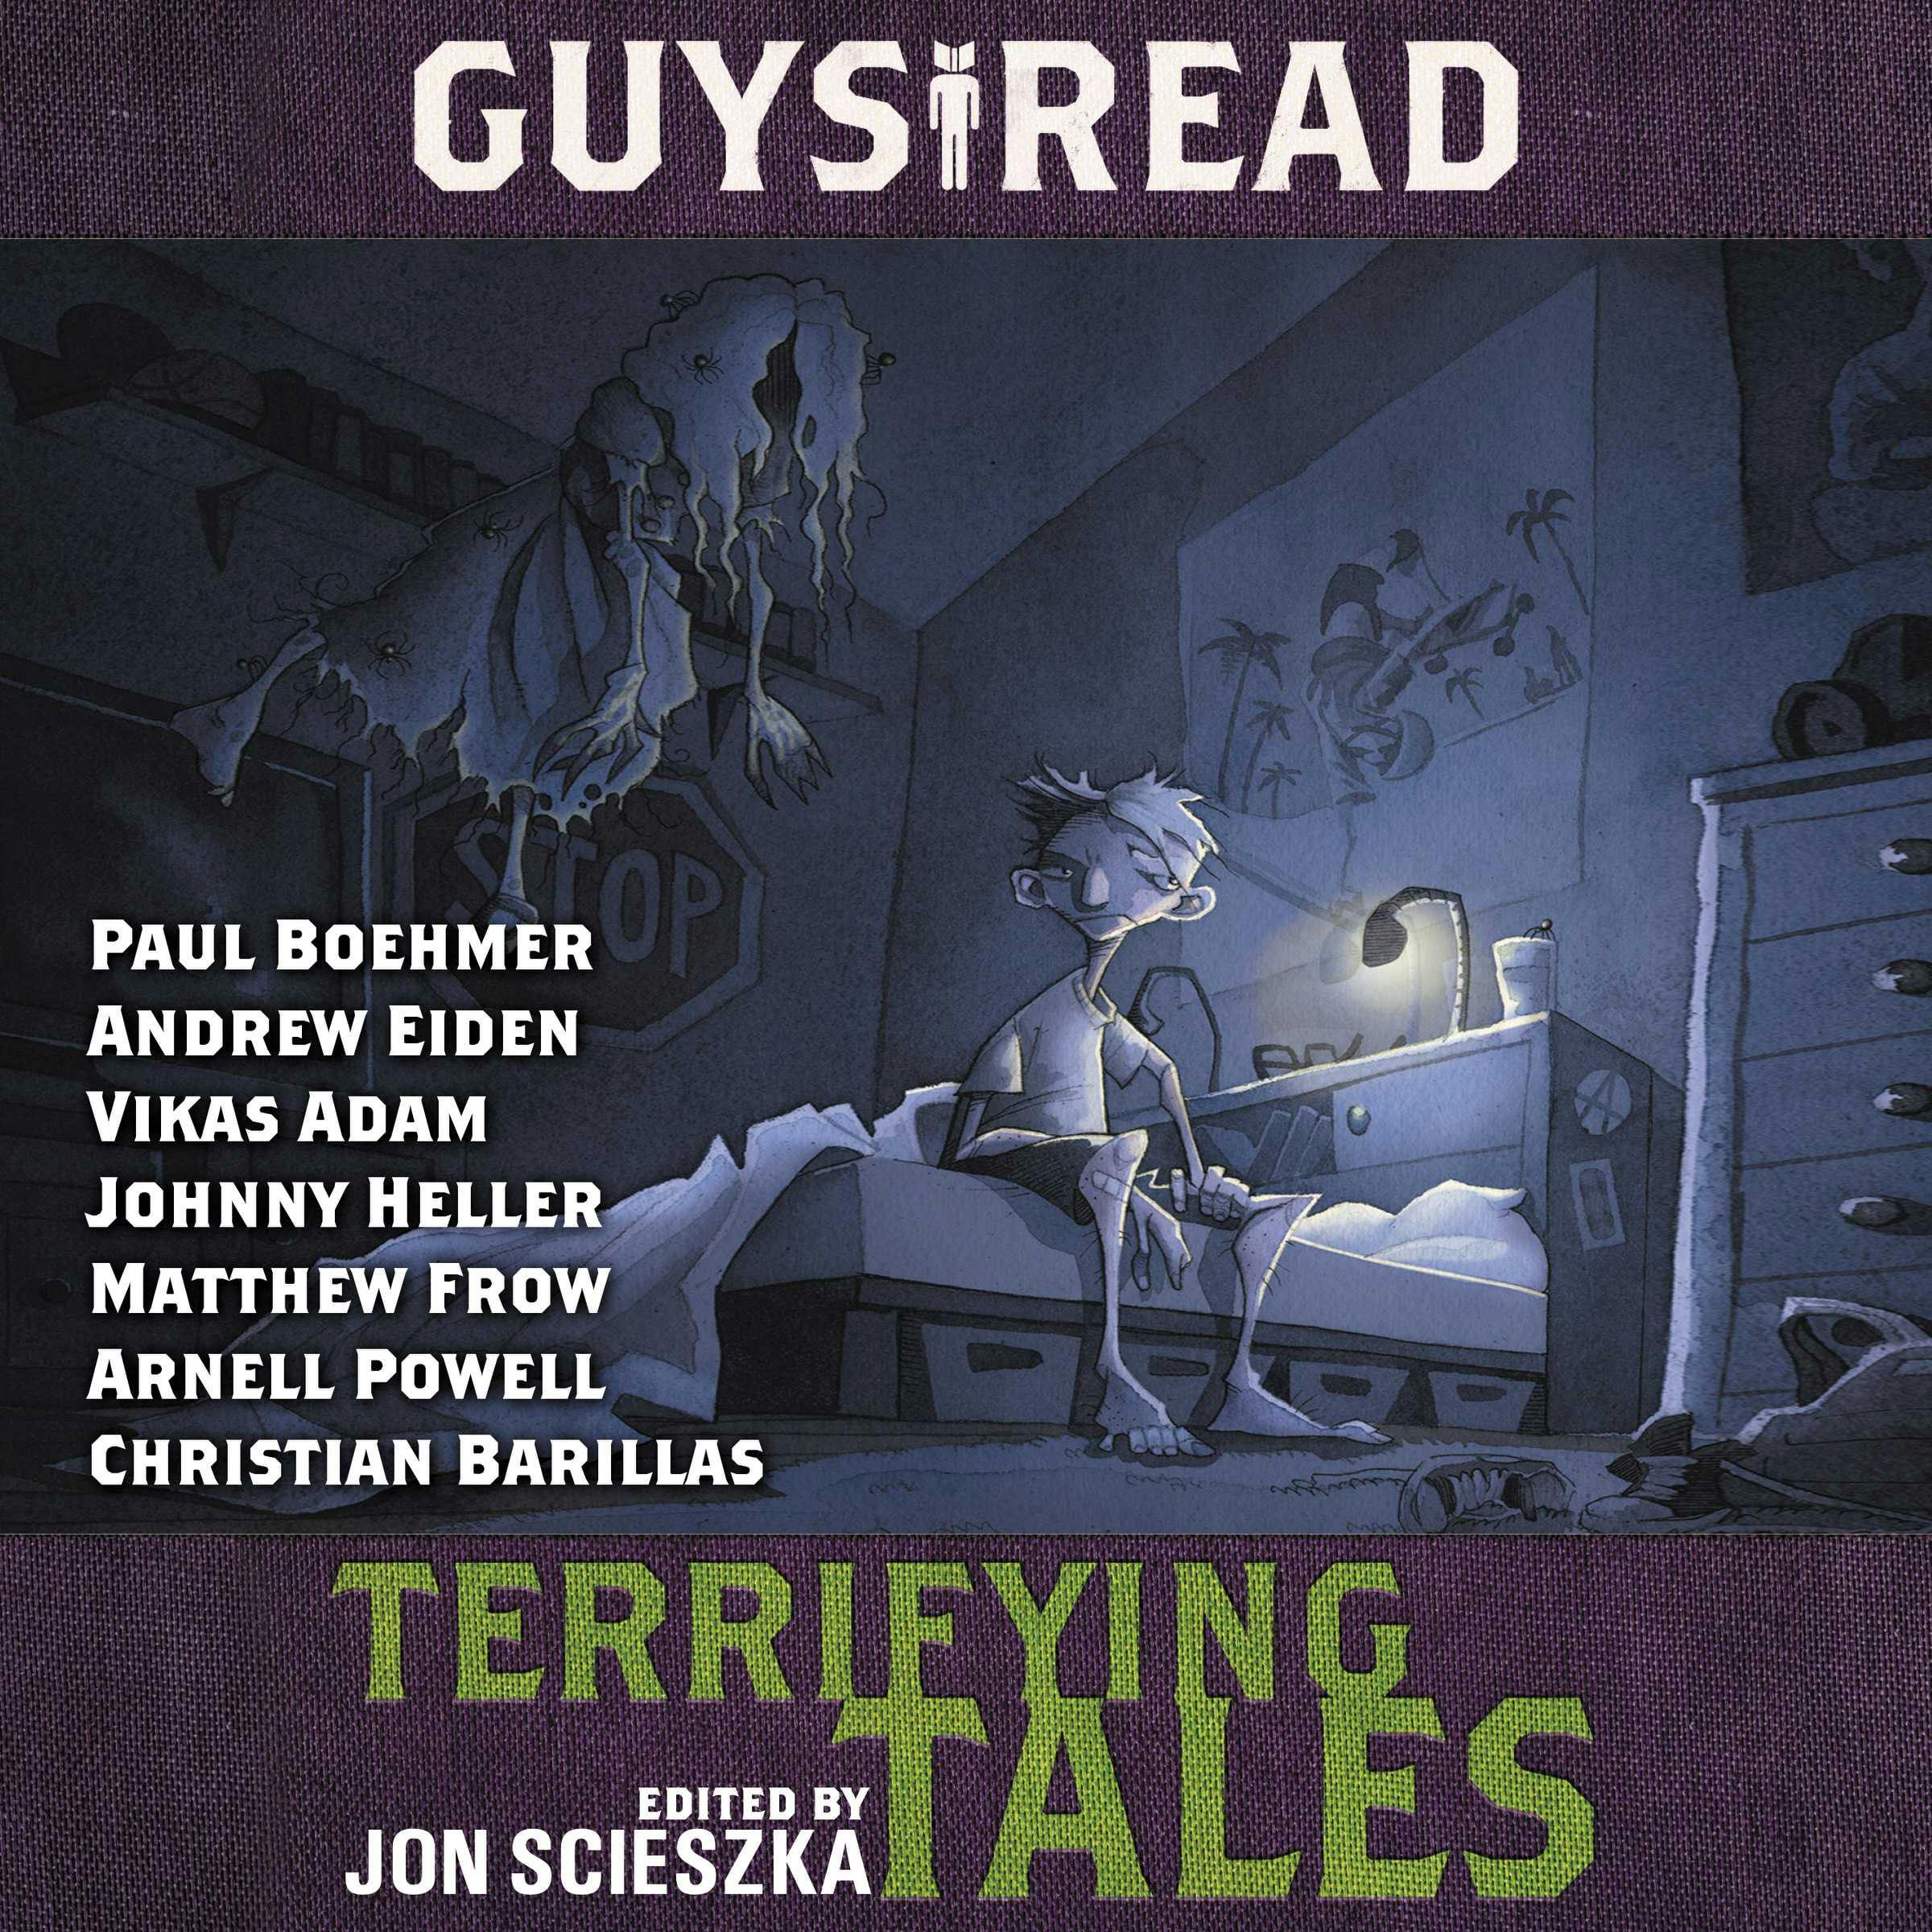 Guys Read: Terrifying Tales - undefined